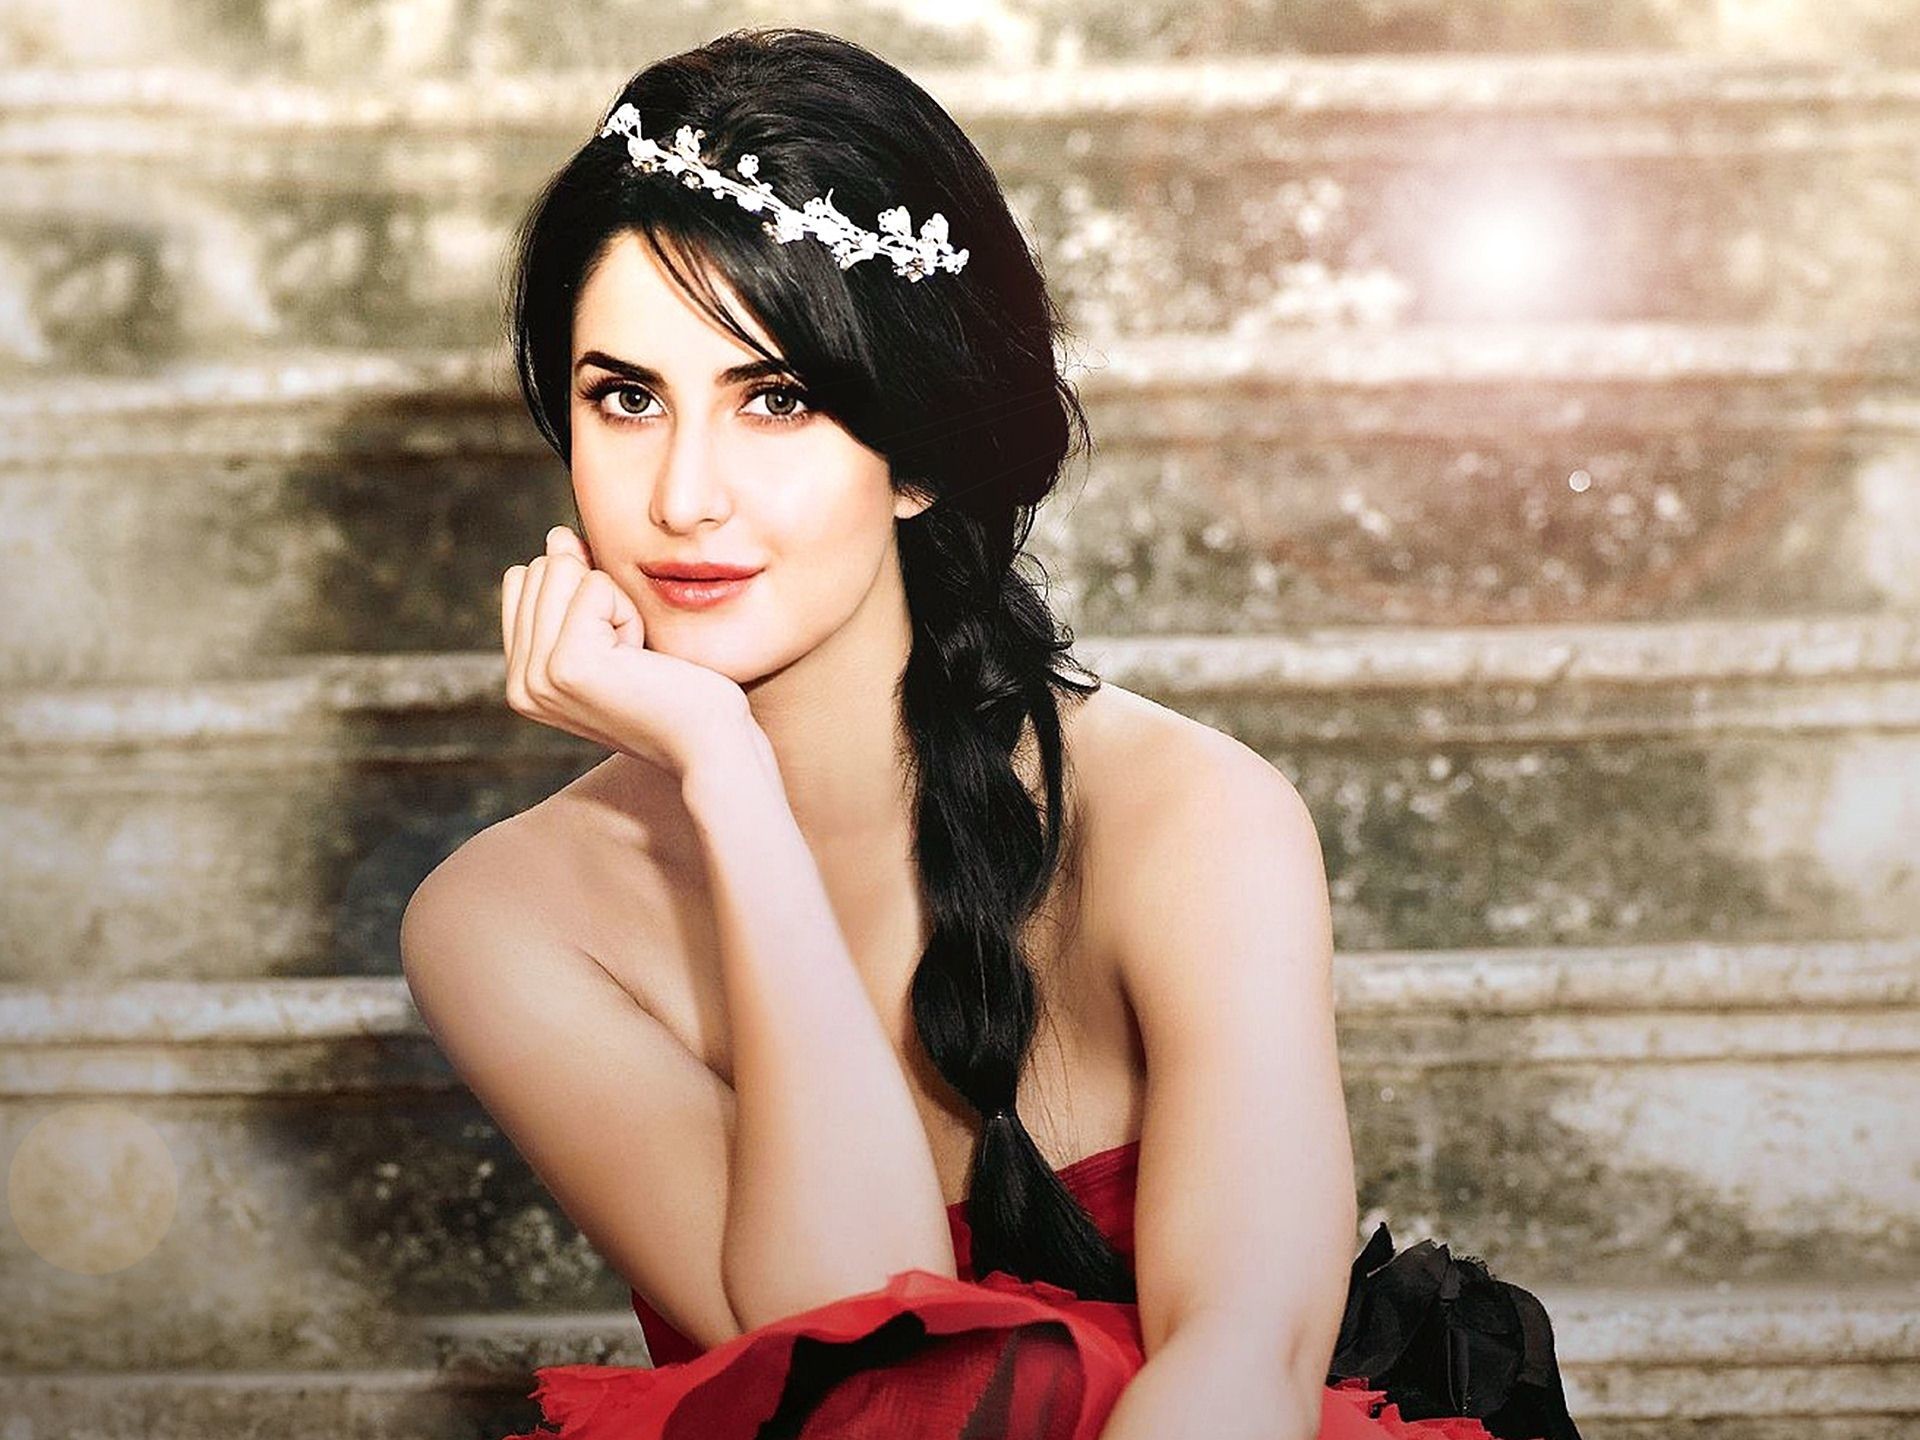 Hd Wallpapers Of Katrina Kaif 76 Pictures Images, Photos, Reviews